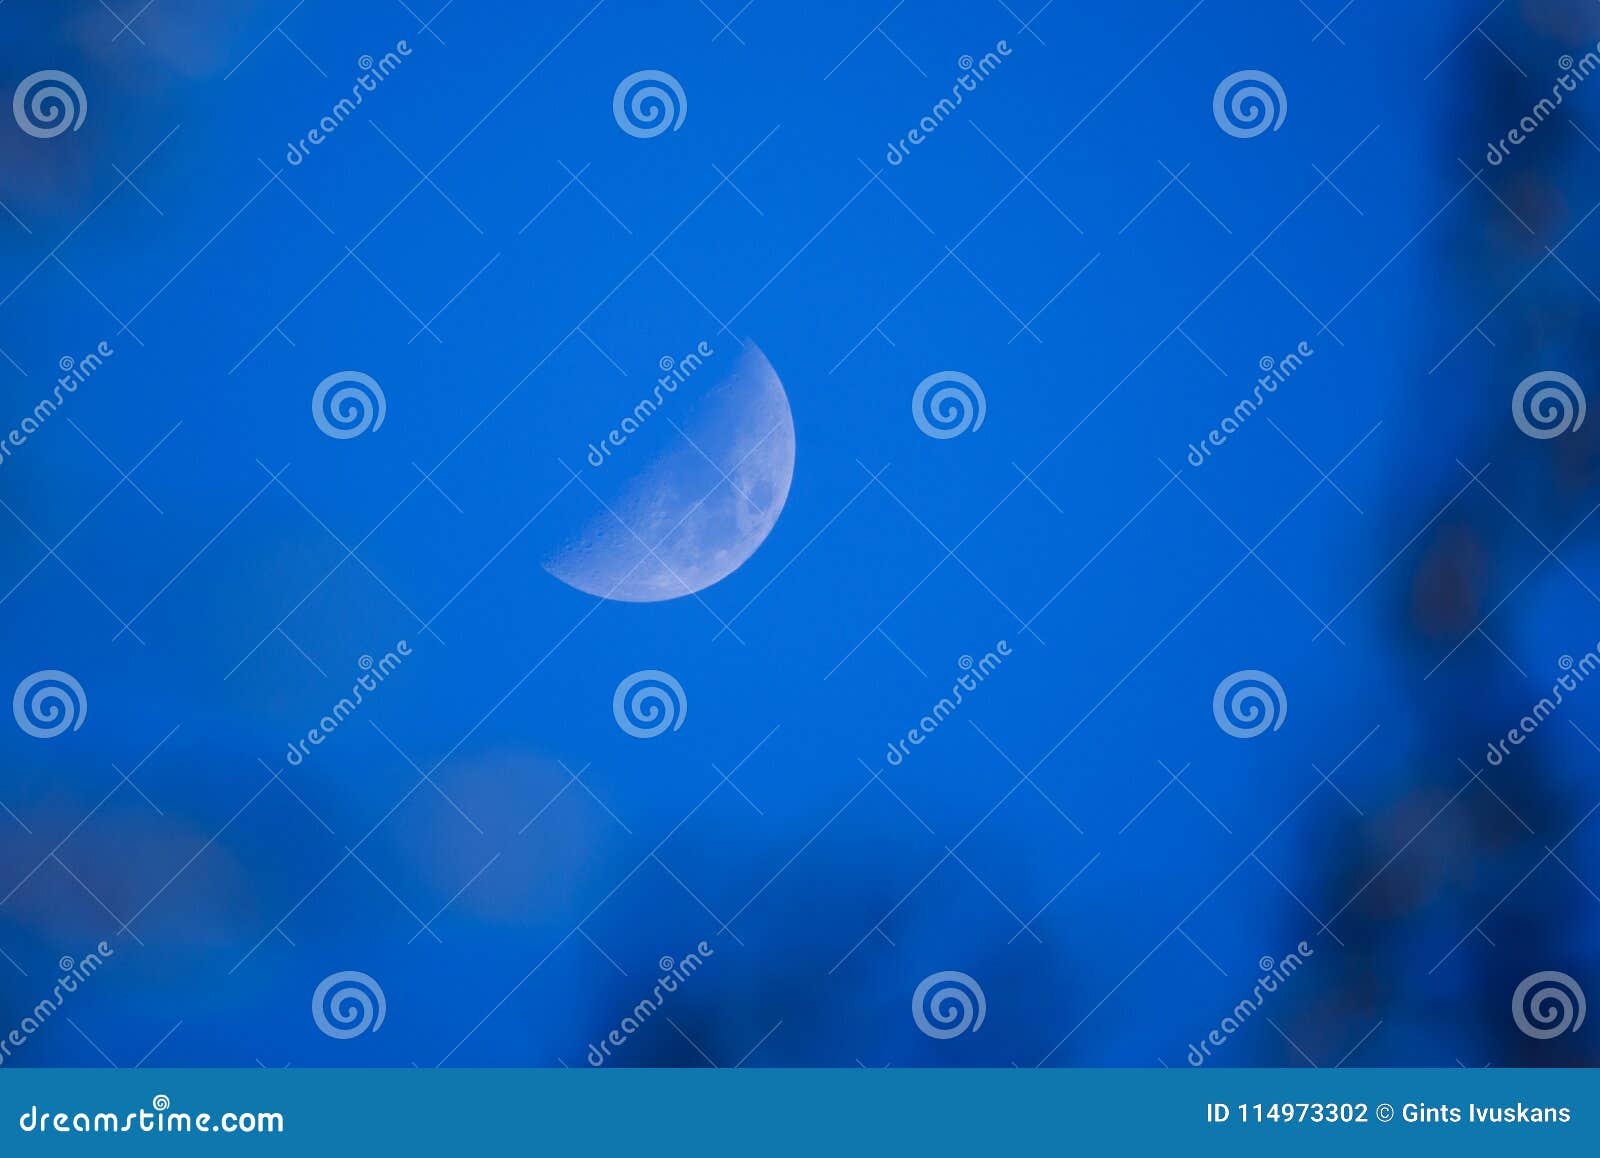 Selective Focus Photo. Growing Moon in the Blue Sky Stock Photo - Image ...